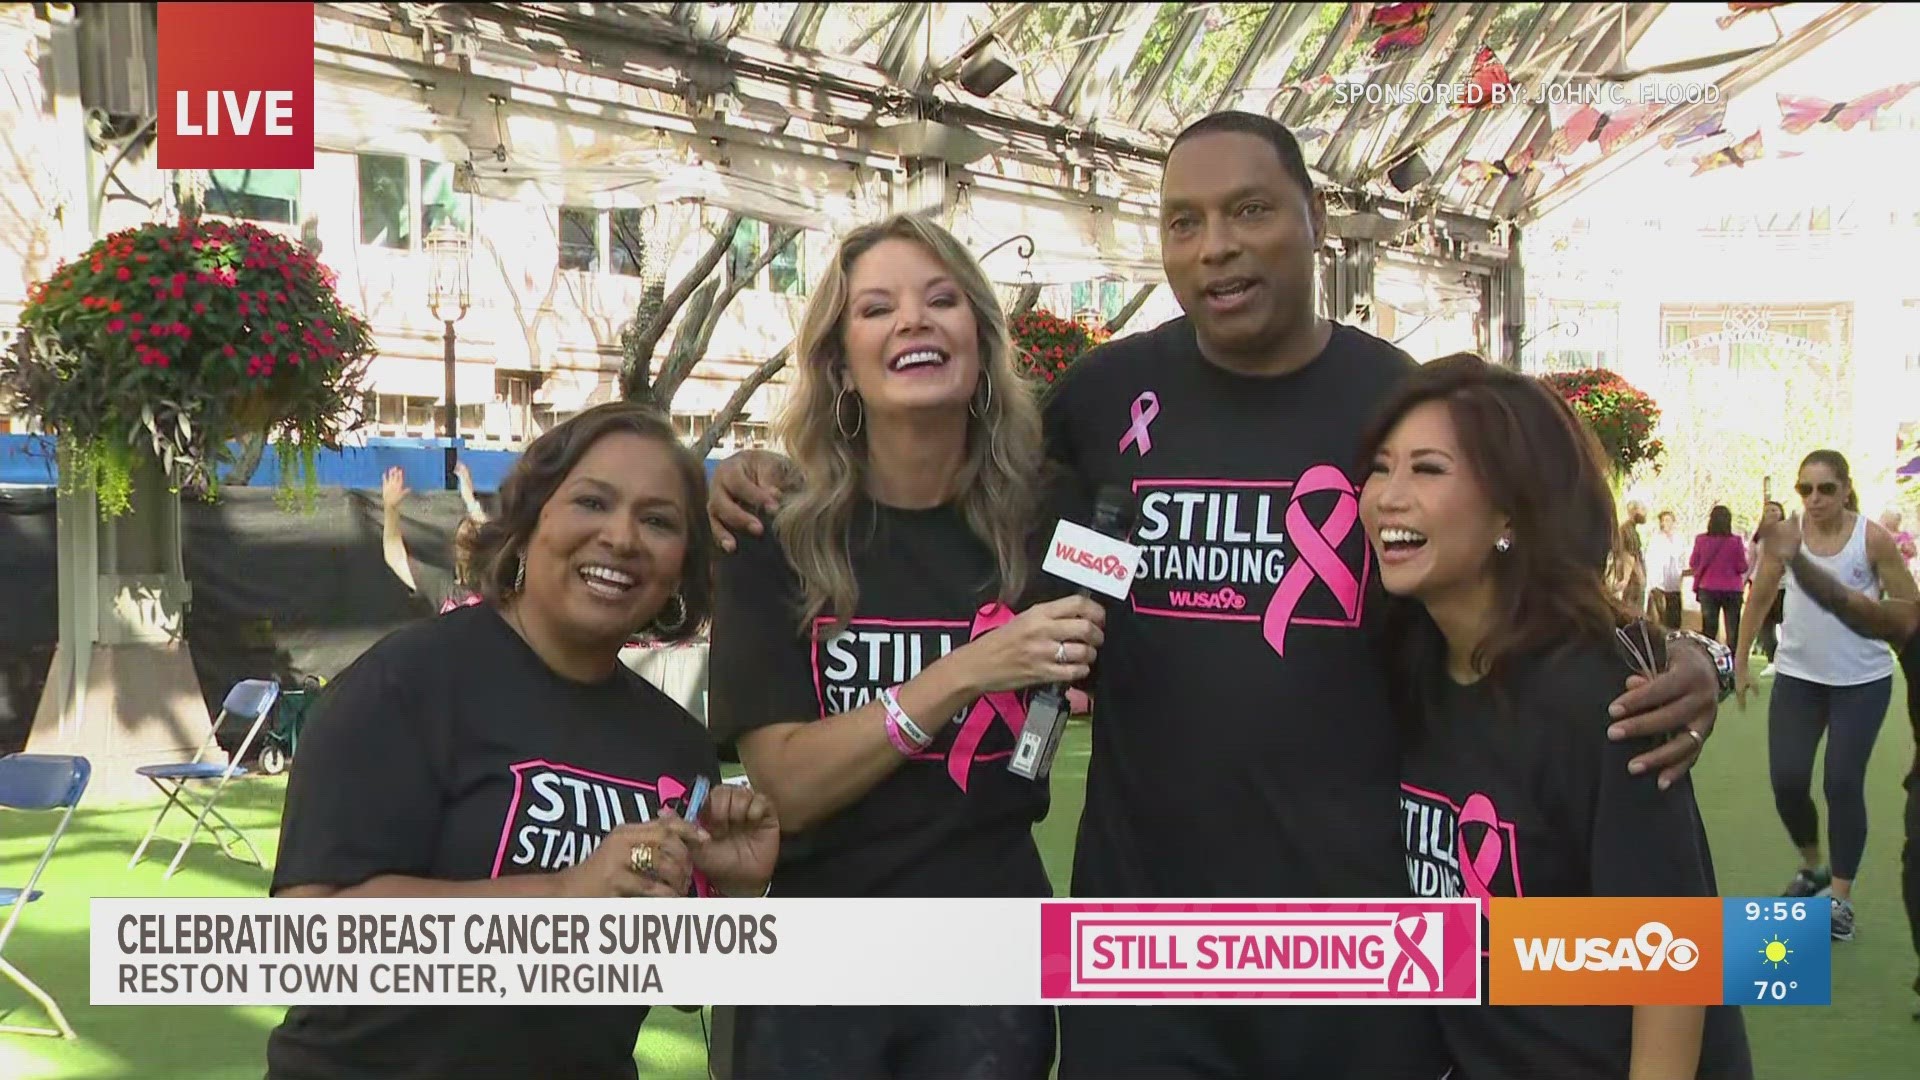 The Get Up DC! team joins Kristen to help celebrate breast cancer survivors at the Still Standing event in Reston Town Center.